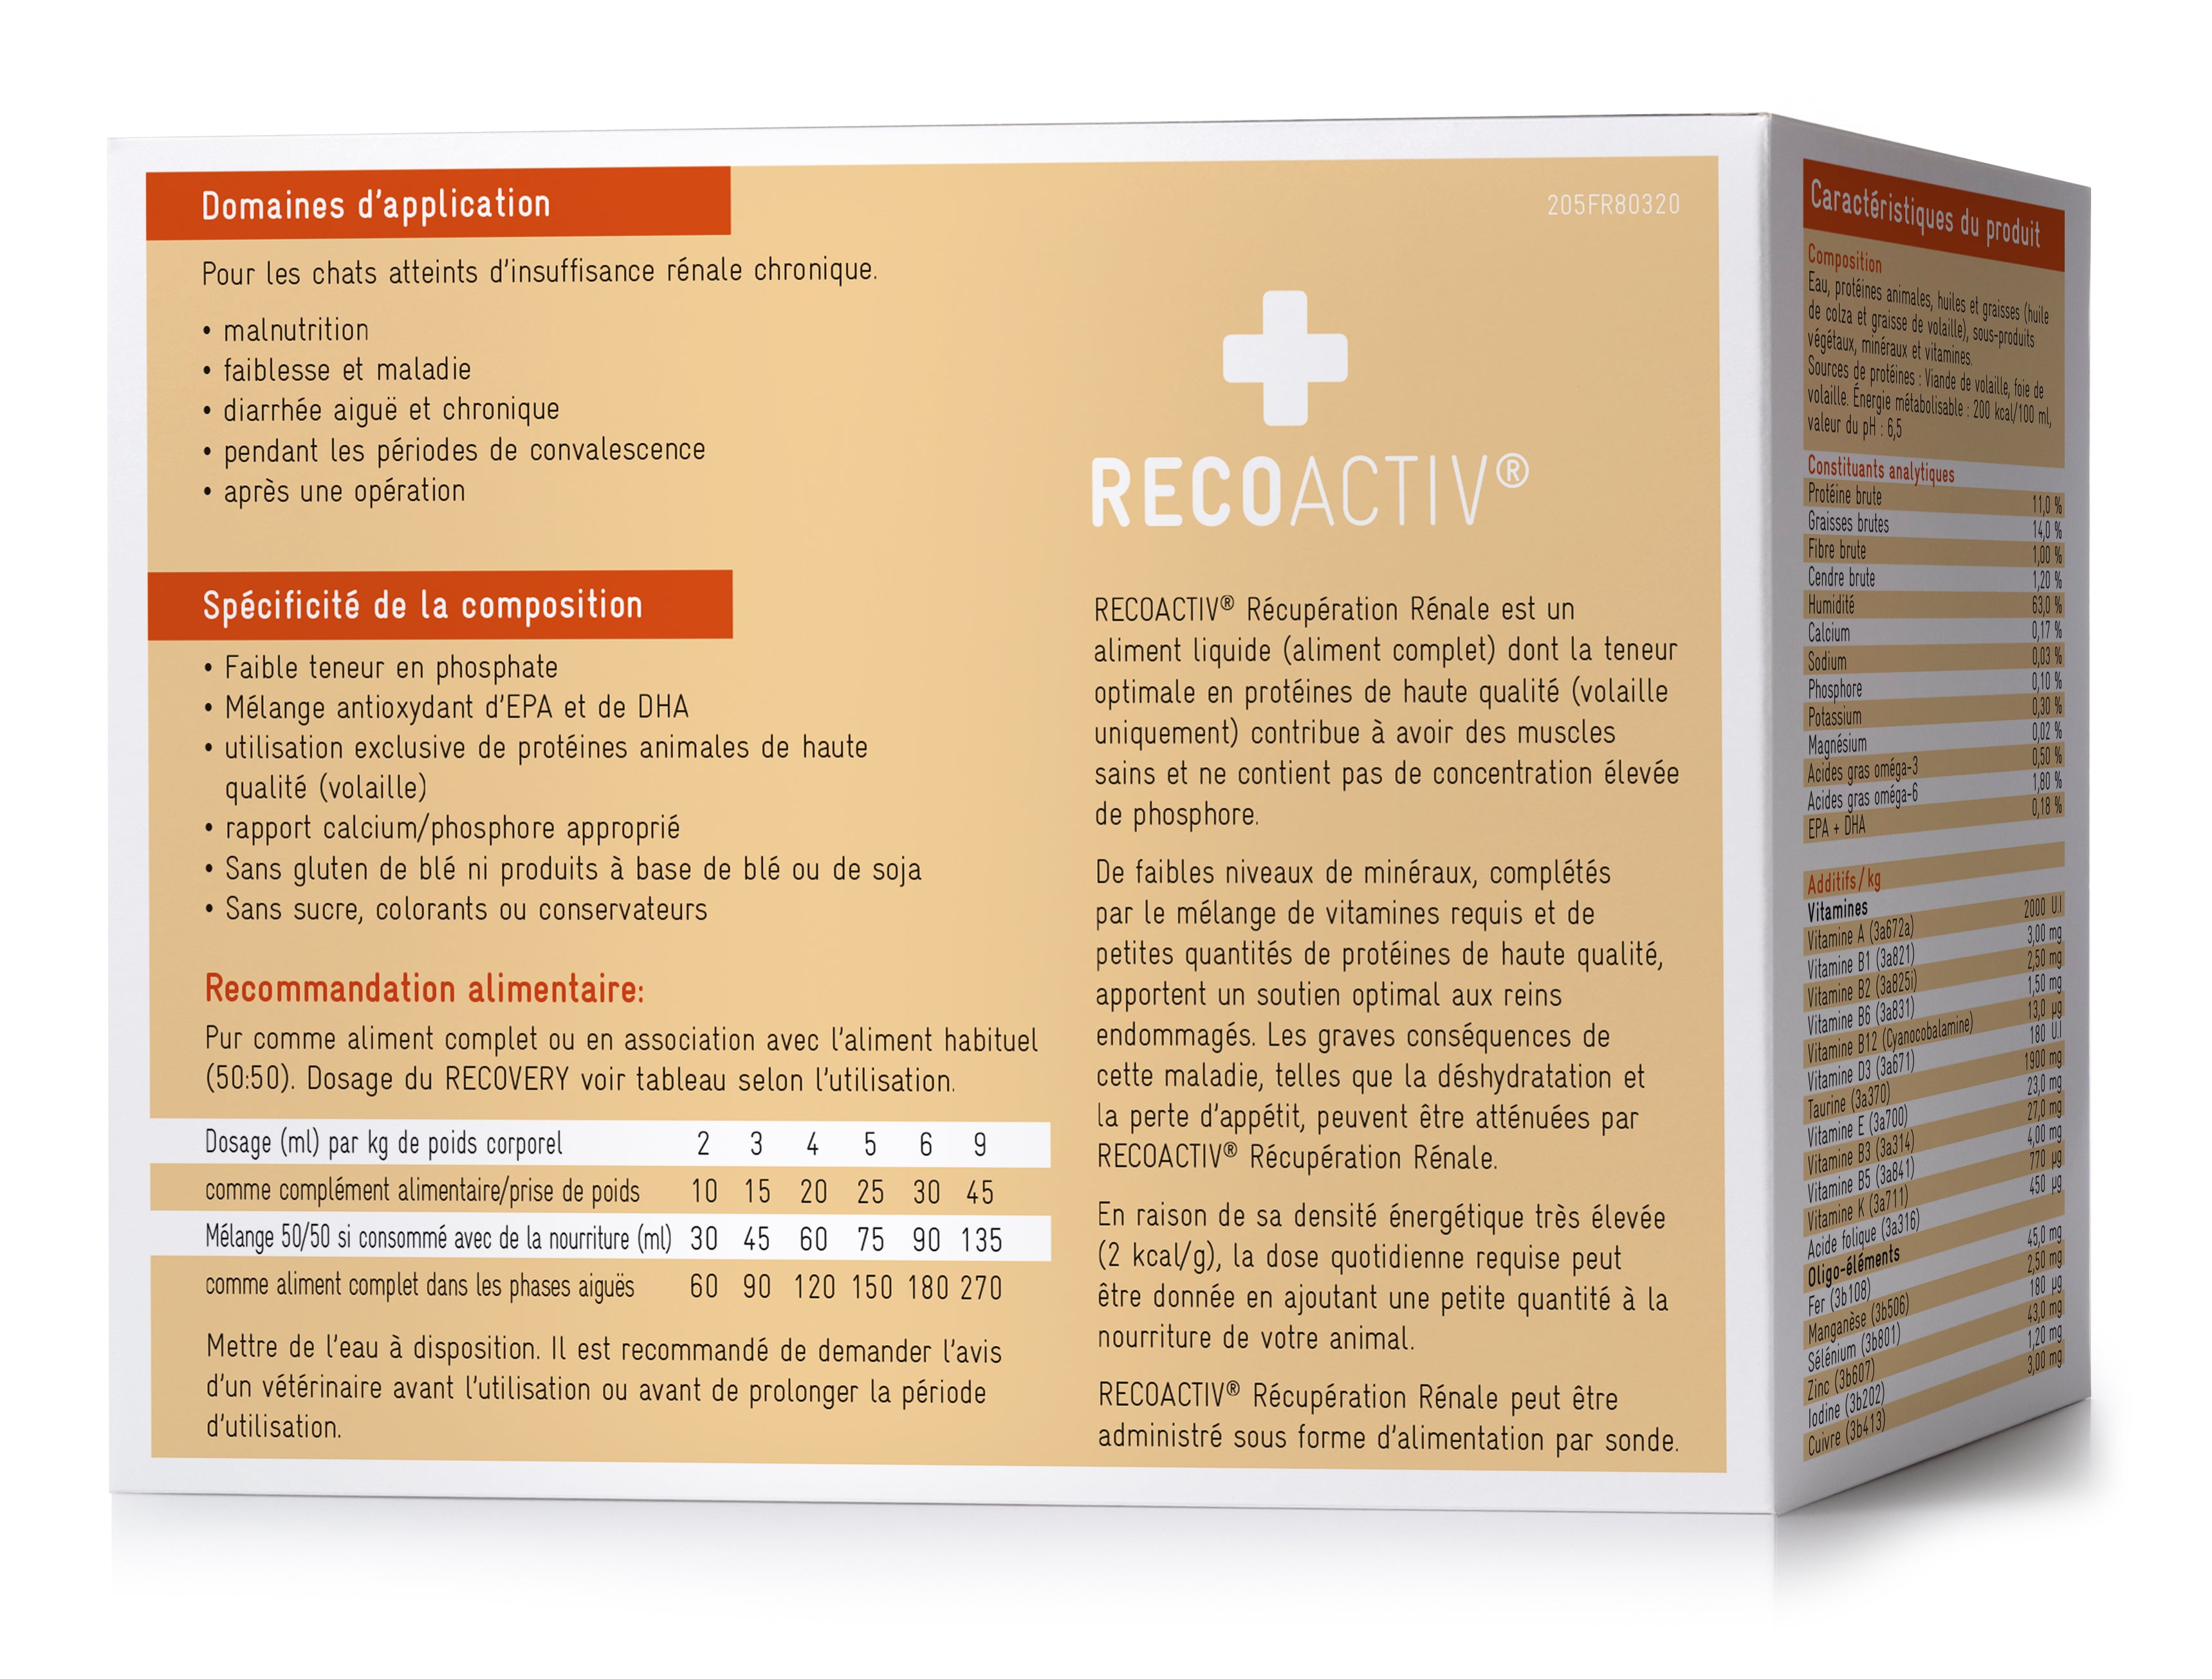 RECOACTIV® Recovery Rénale Tonique